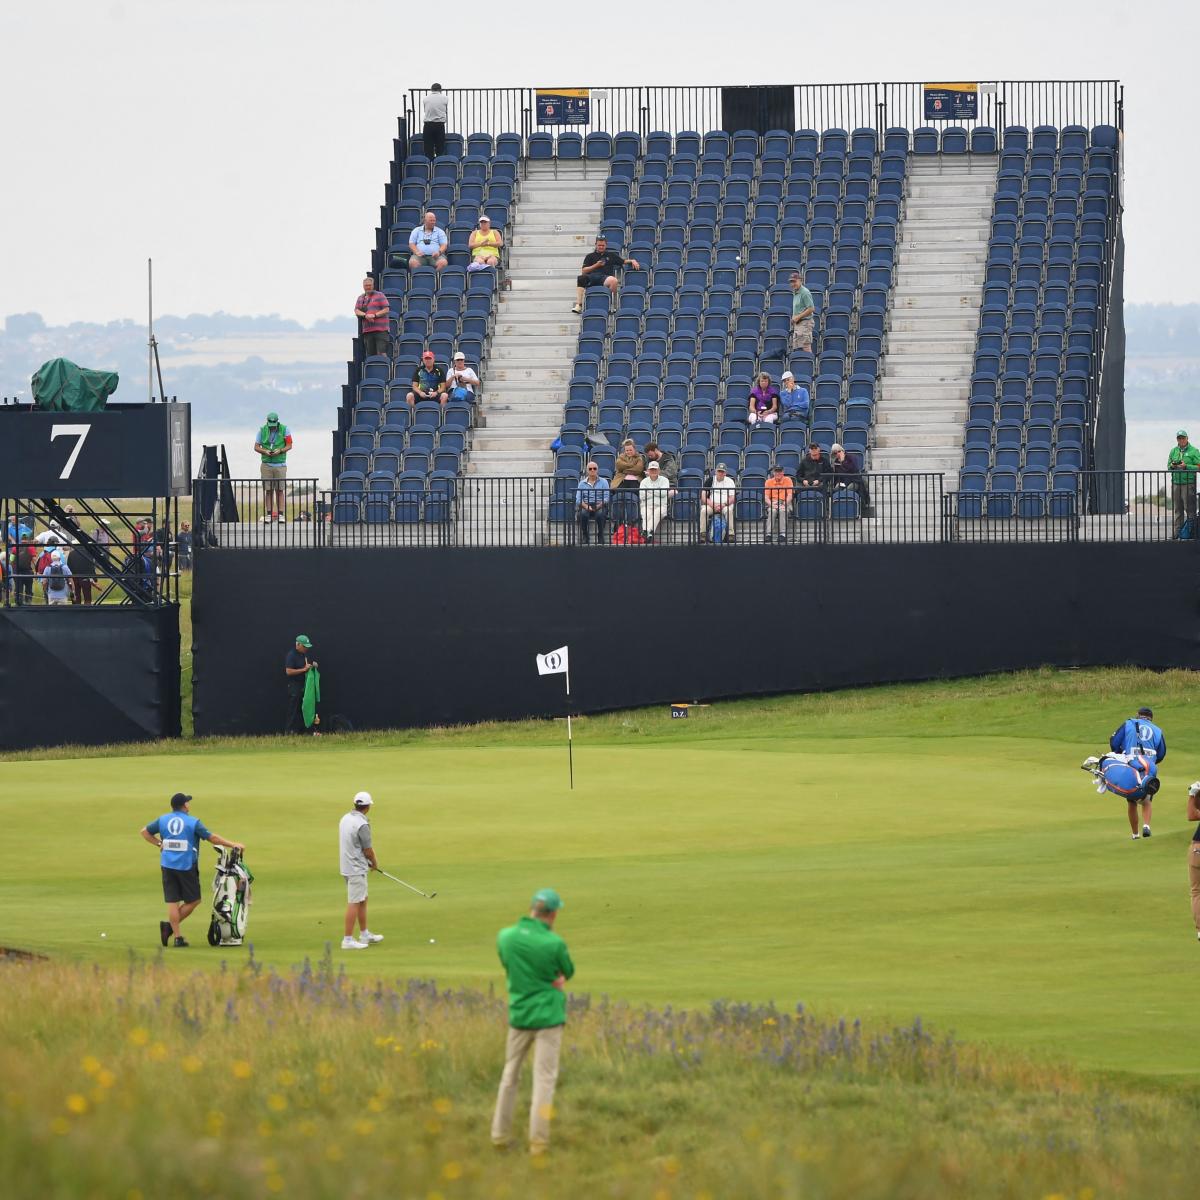 British Open 2021 Start Time, Live Stream, TV Schedule, Odds and